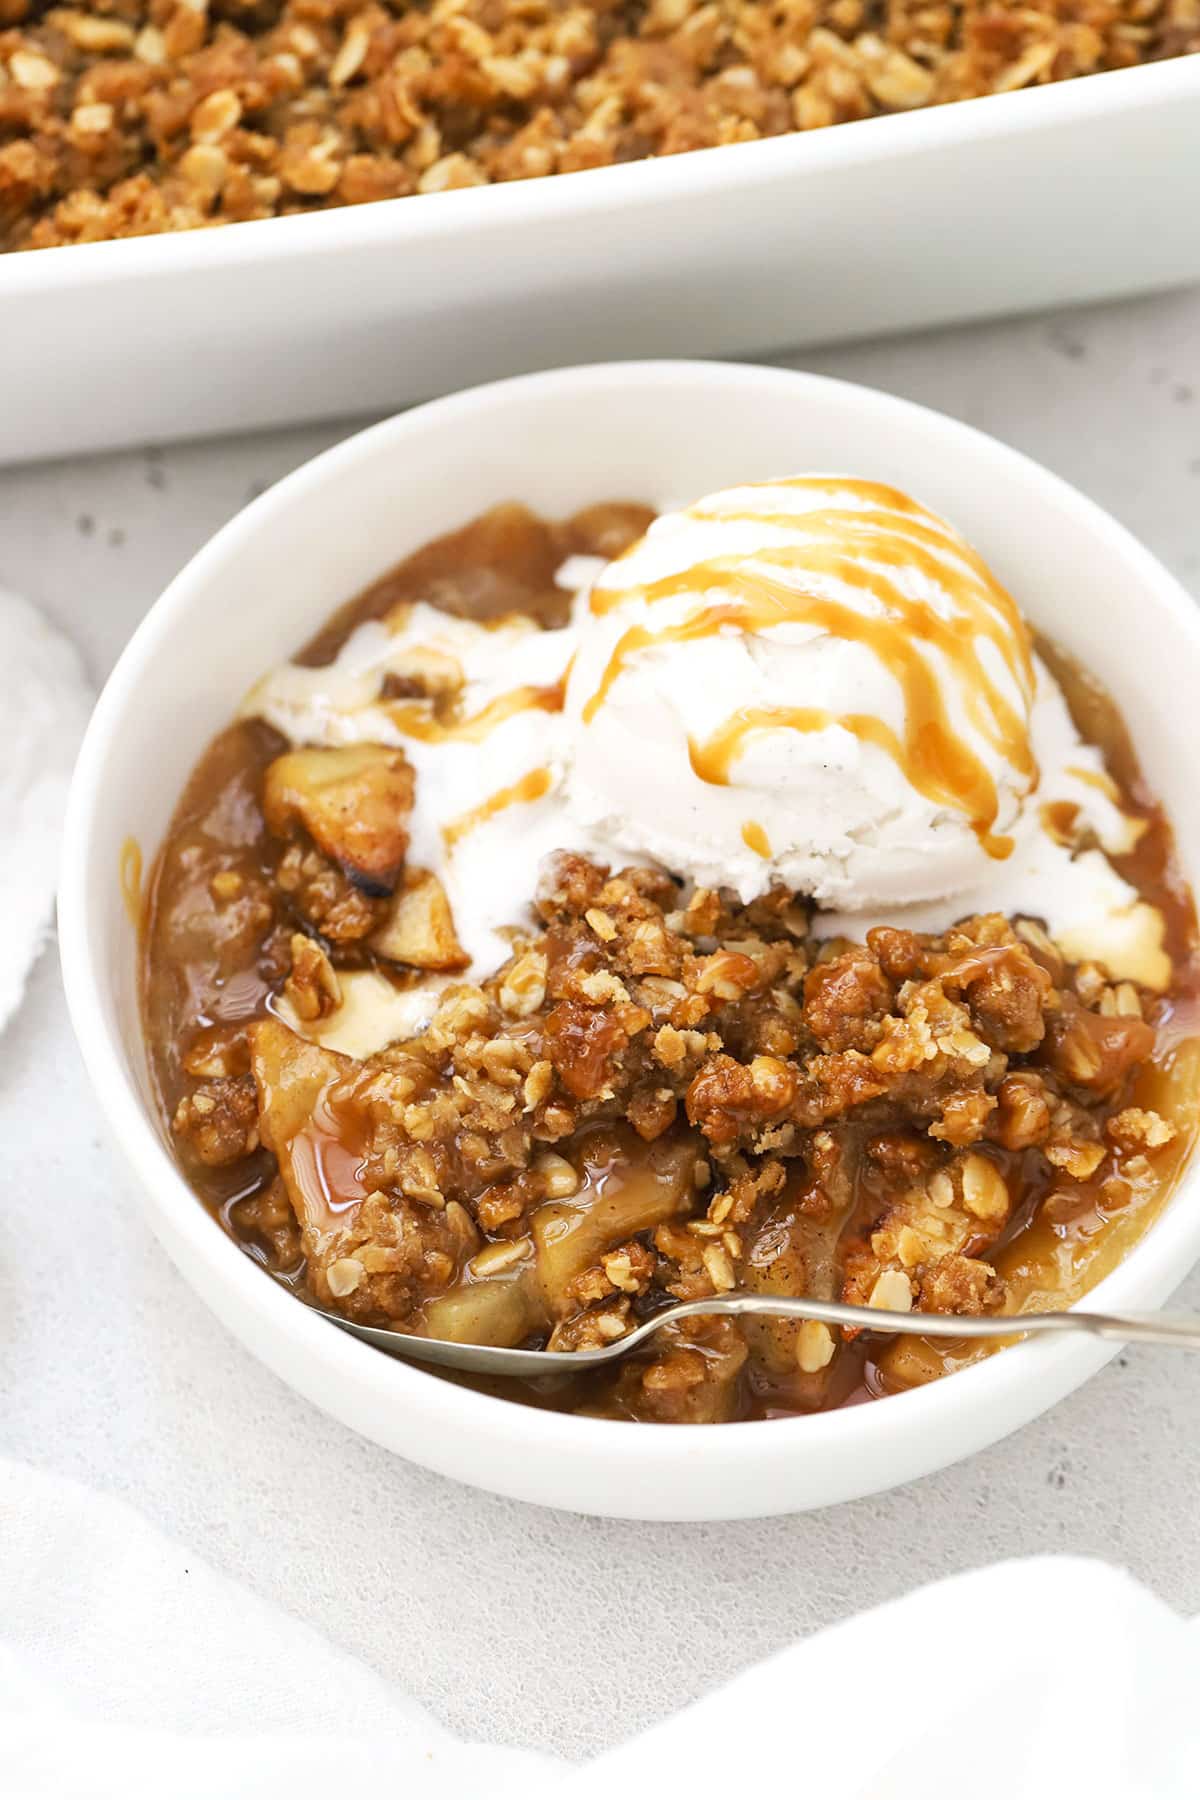 a bowl of gluten-free apple crisp with caramel sauce and a scoop of ice cream